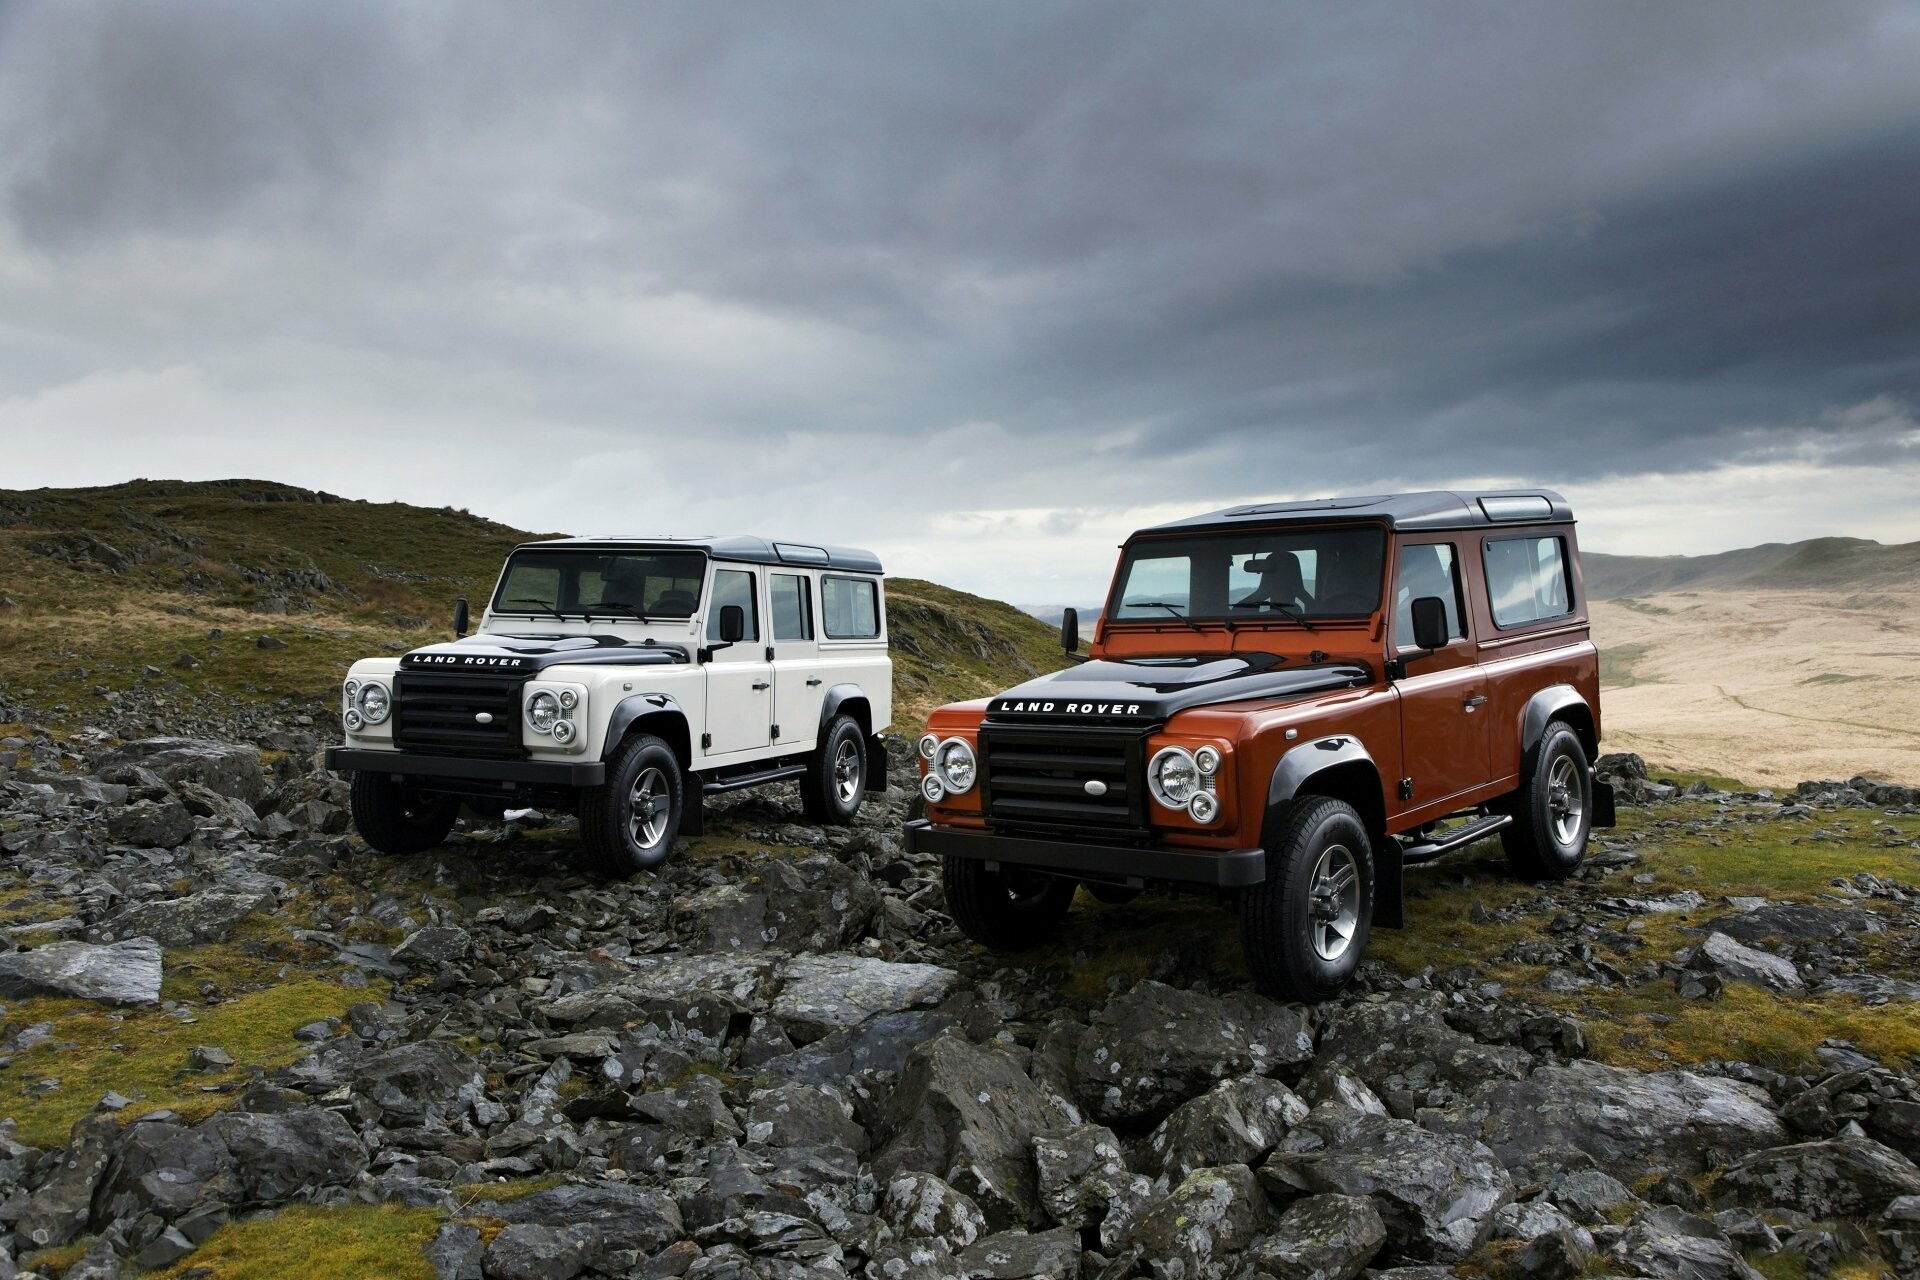 Land Rover: Models 90 (Ninety)/110 (One-Ten)/127 (renamed Defender in 1990) were introduced in 1983. 1920x1280 HD Wallpaper.